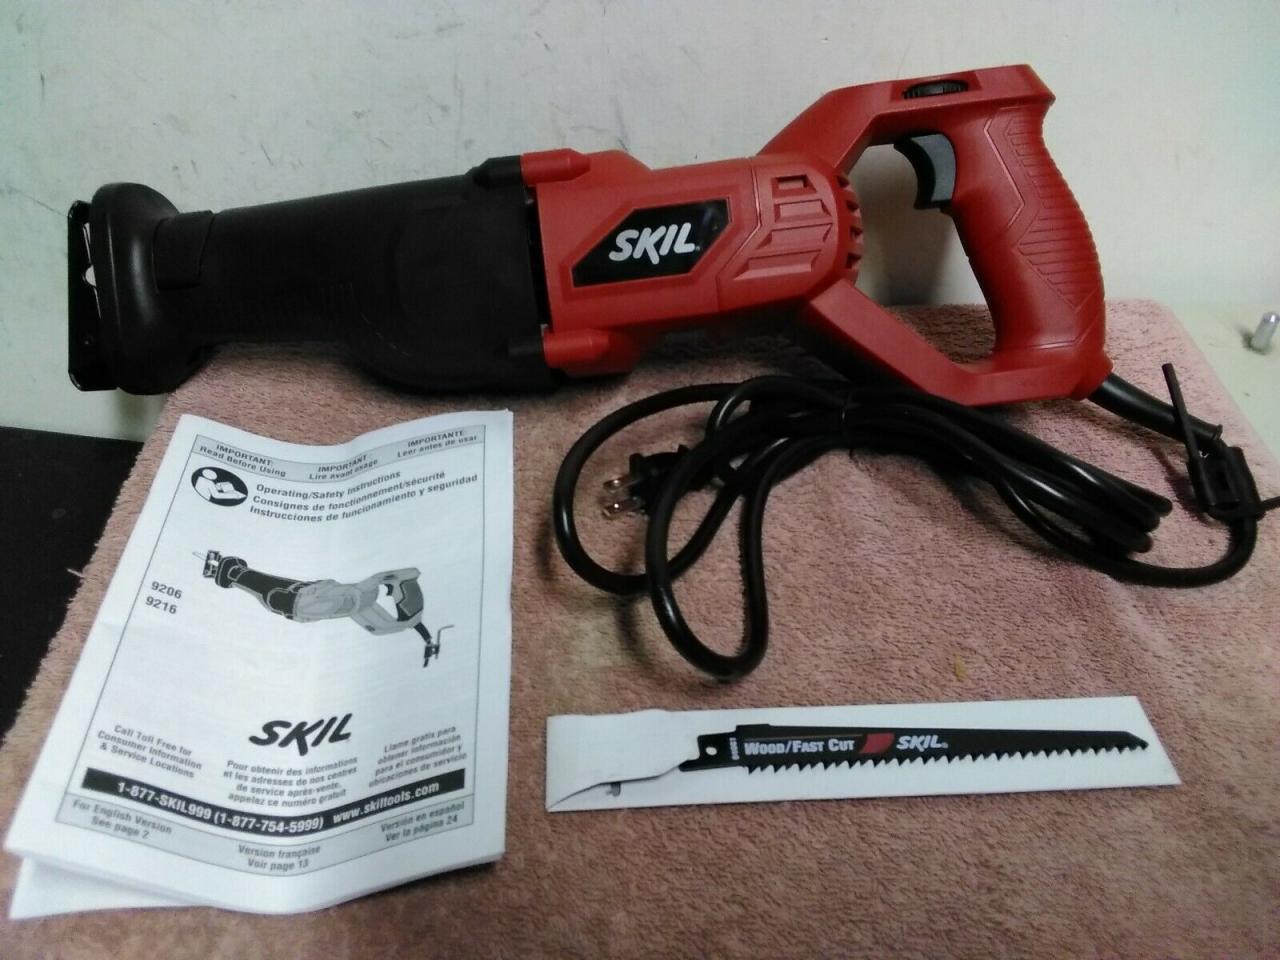 SKIL 9206-02 7.5 Amp Variable Speed Reciprocating Saw for sale online | eBay